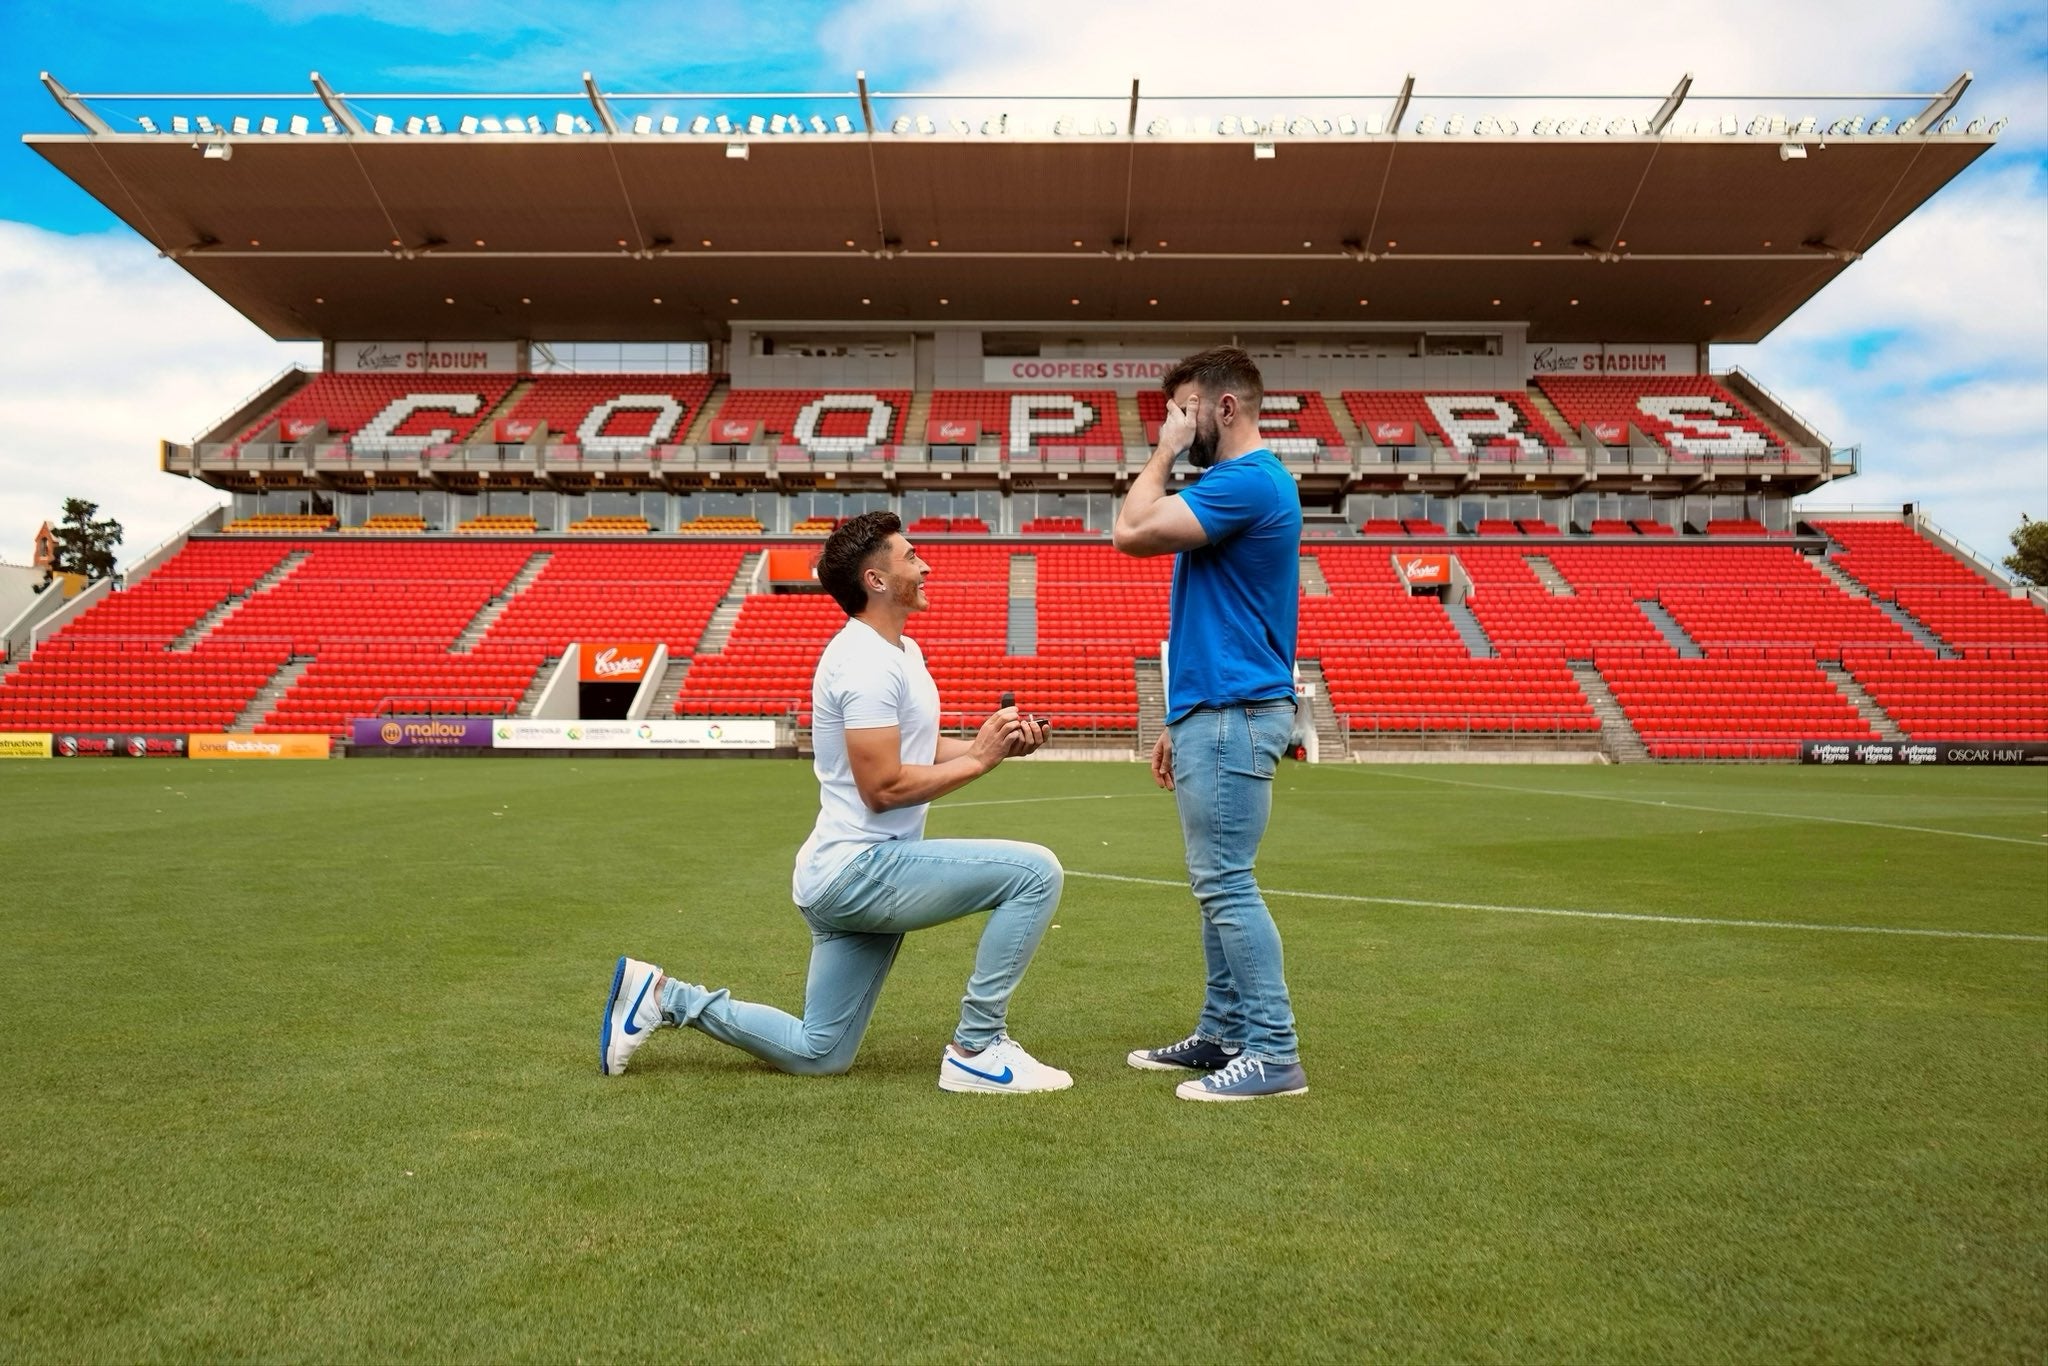 Australian footballer Josh Cavallo, openly gay player, propose to his partner on pitch of Adelaide United’s Coopers Stadium